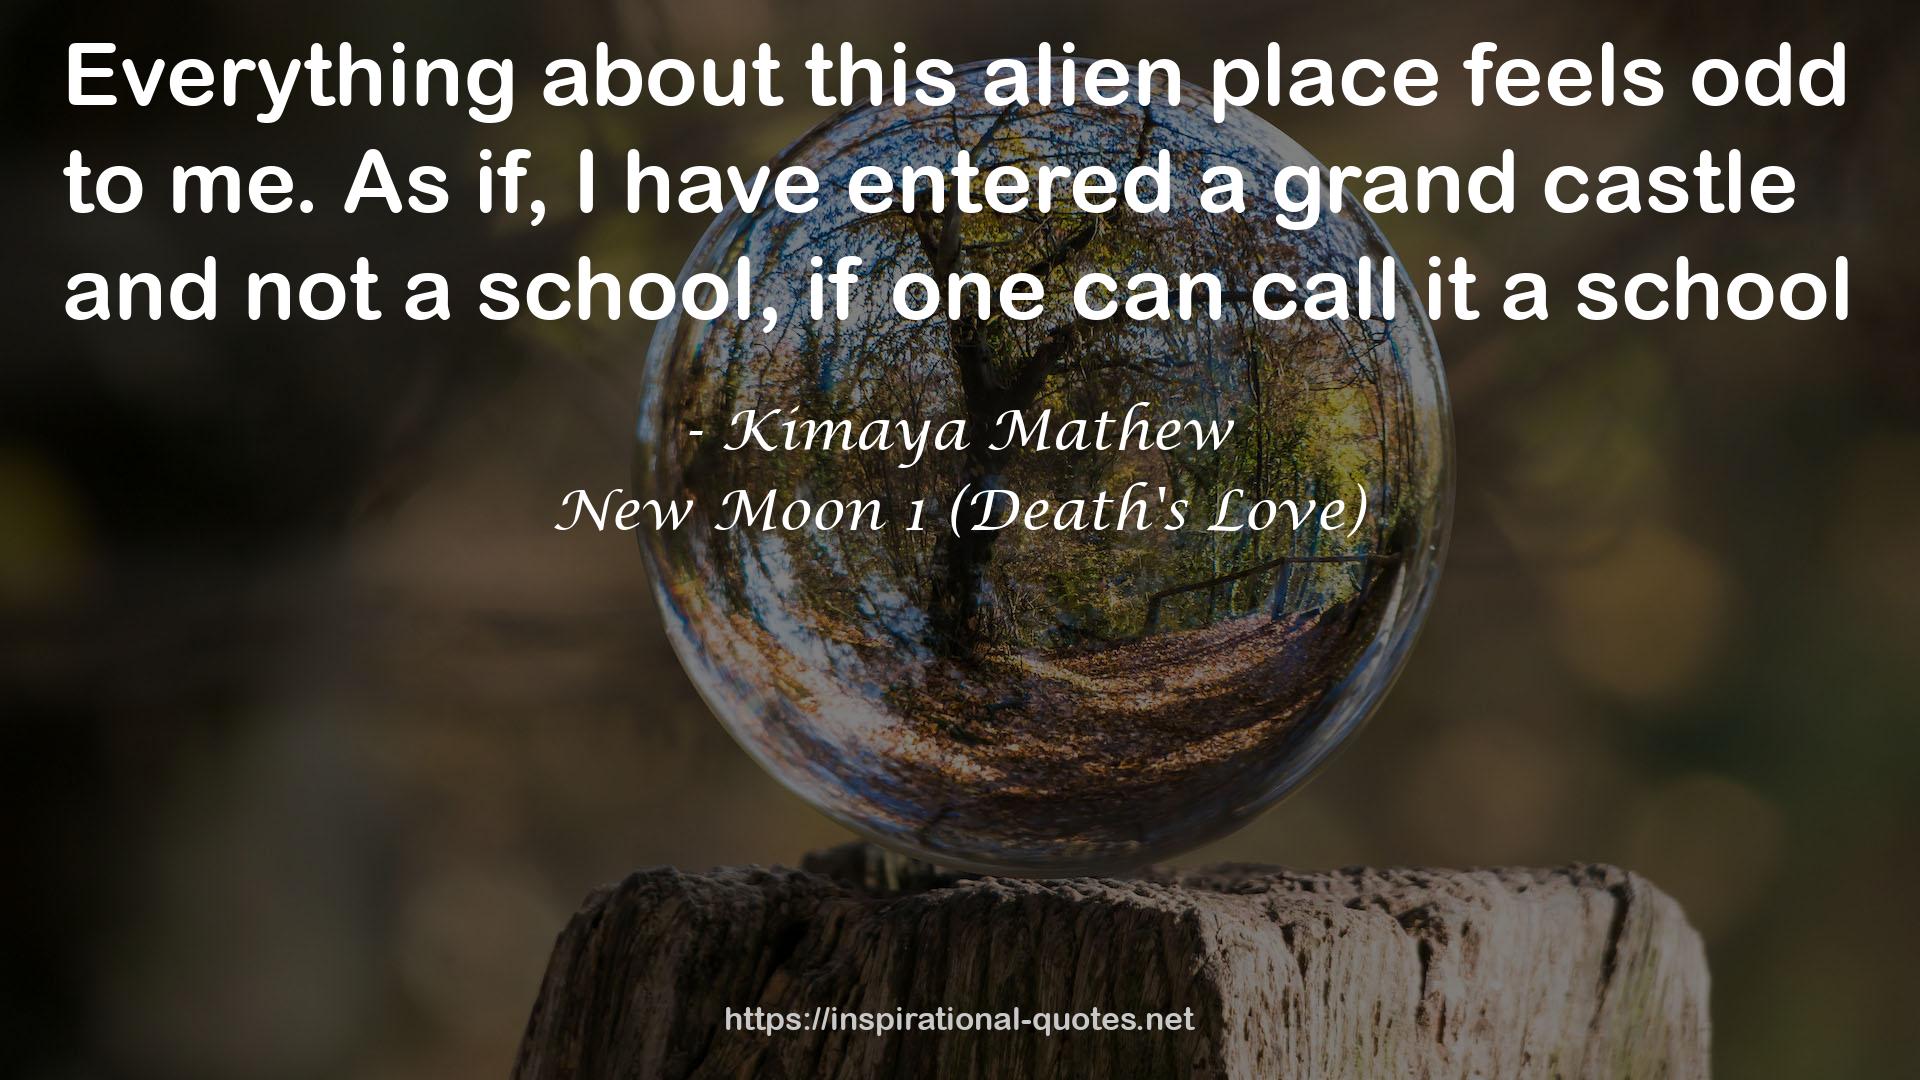 New Moon 1 (Death's Love) QUOTES